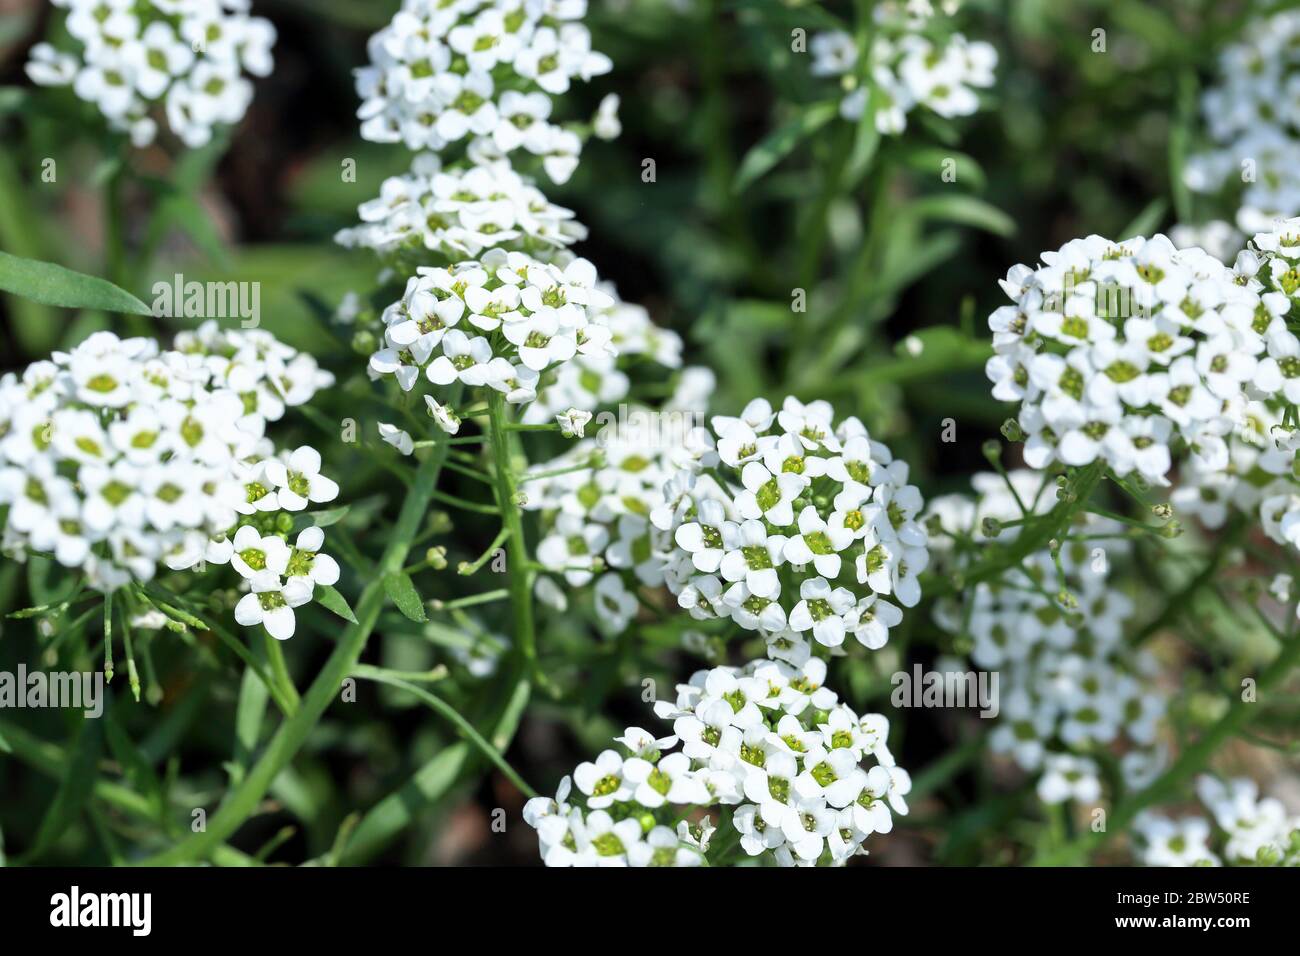 close-up image of tiny white flowers of Alyssum maritimum, common name sweet alyssum or sweet alison blooming in the backyard Stock Photo